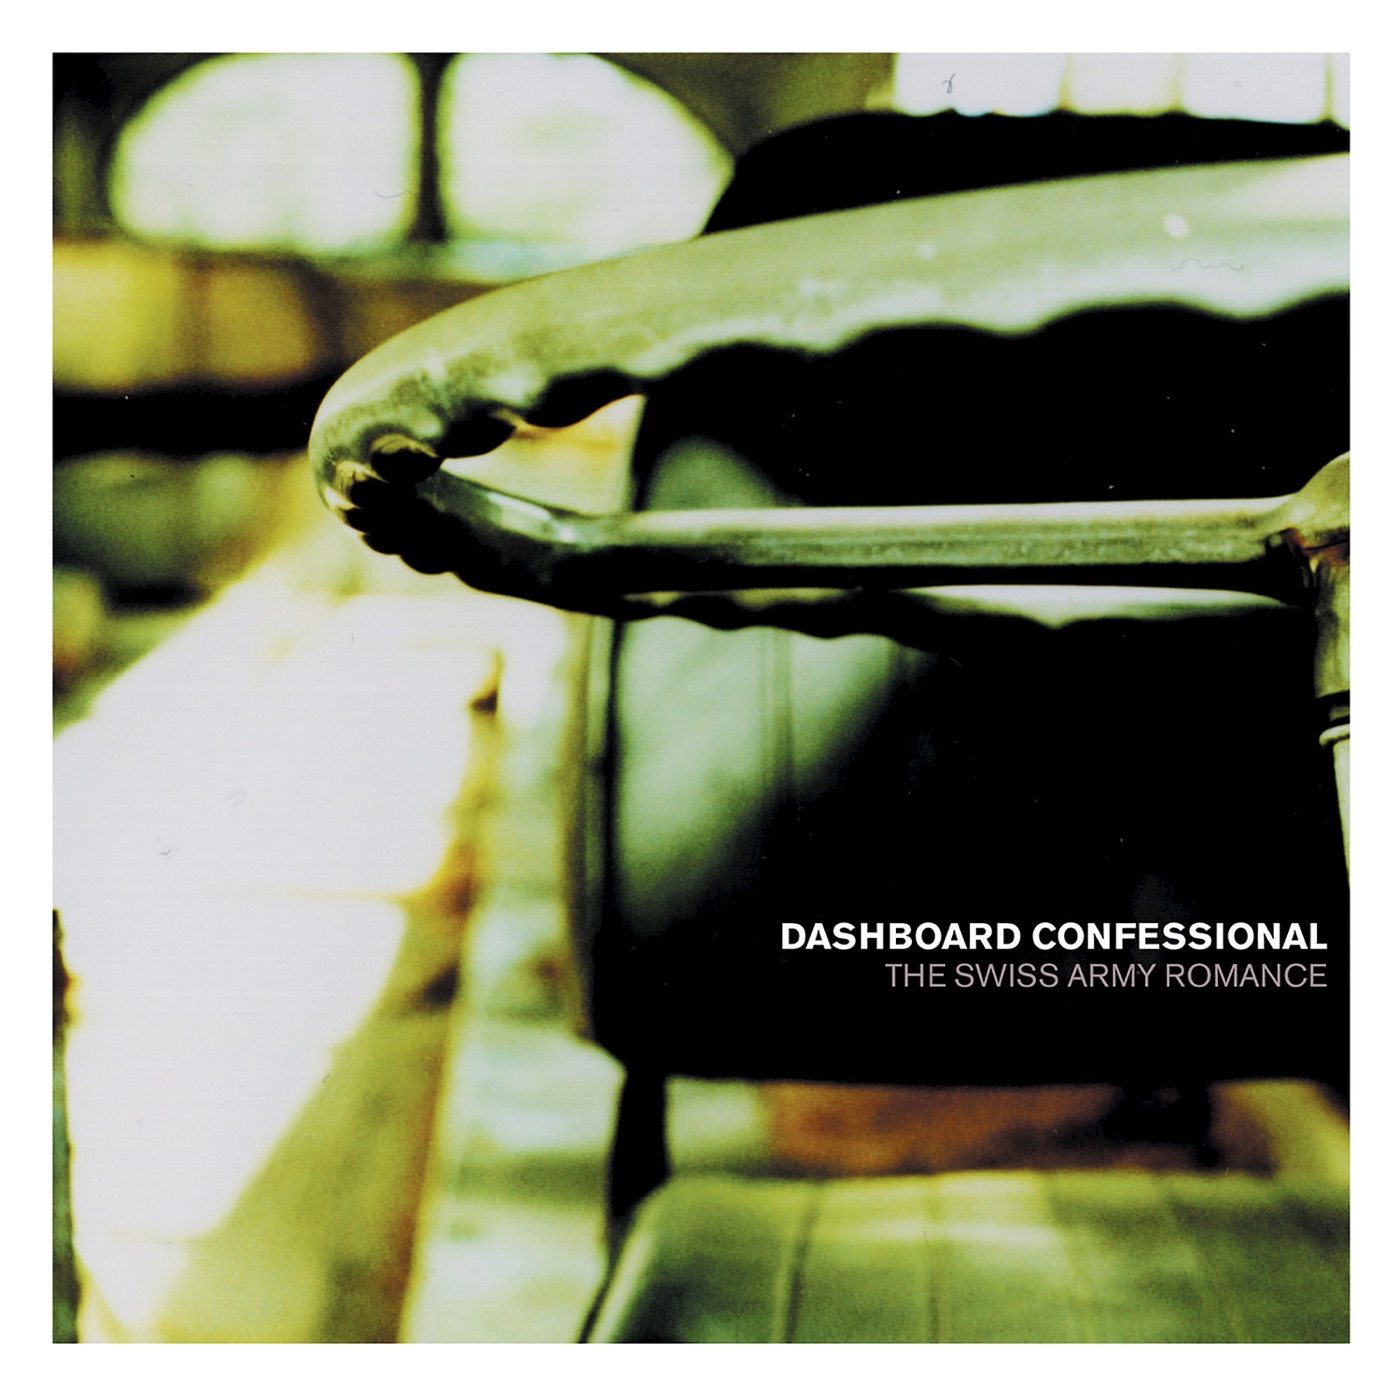 The Swiss Army Romance by Dashboard Confessional